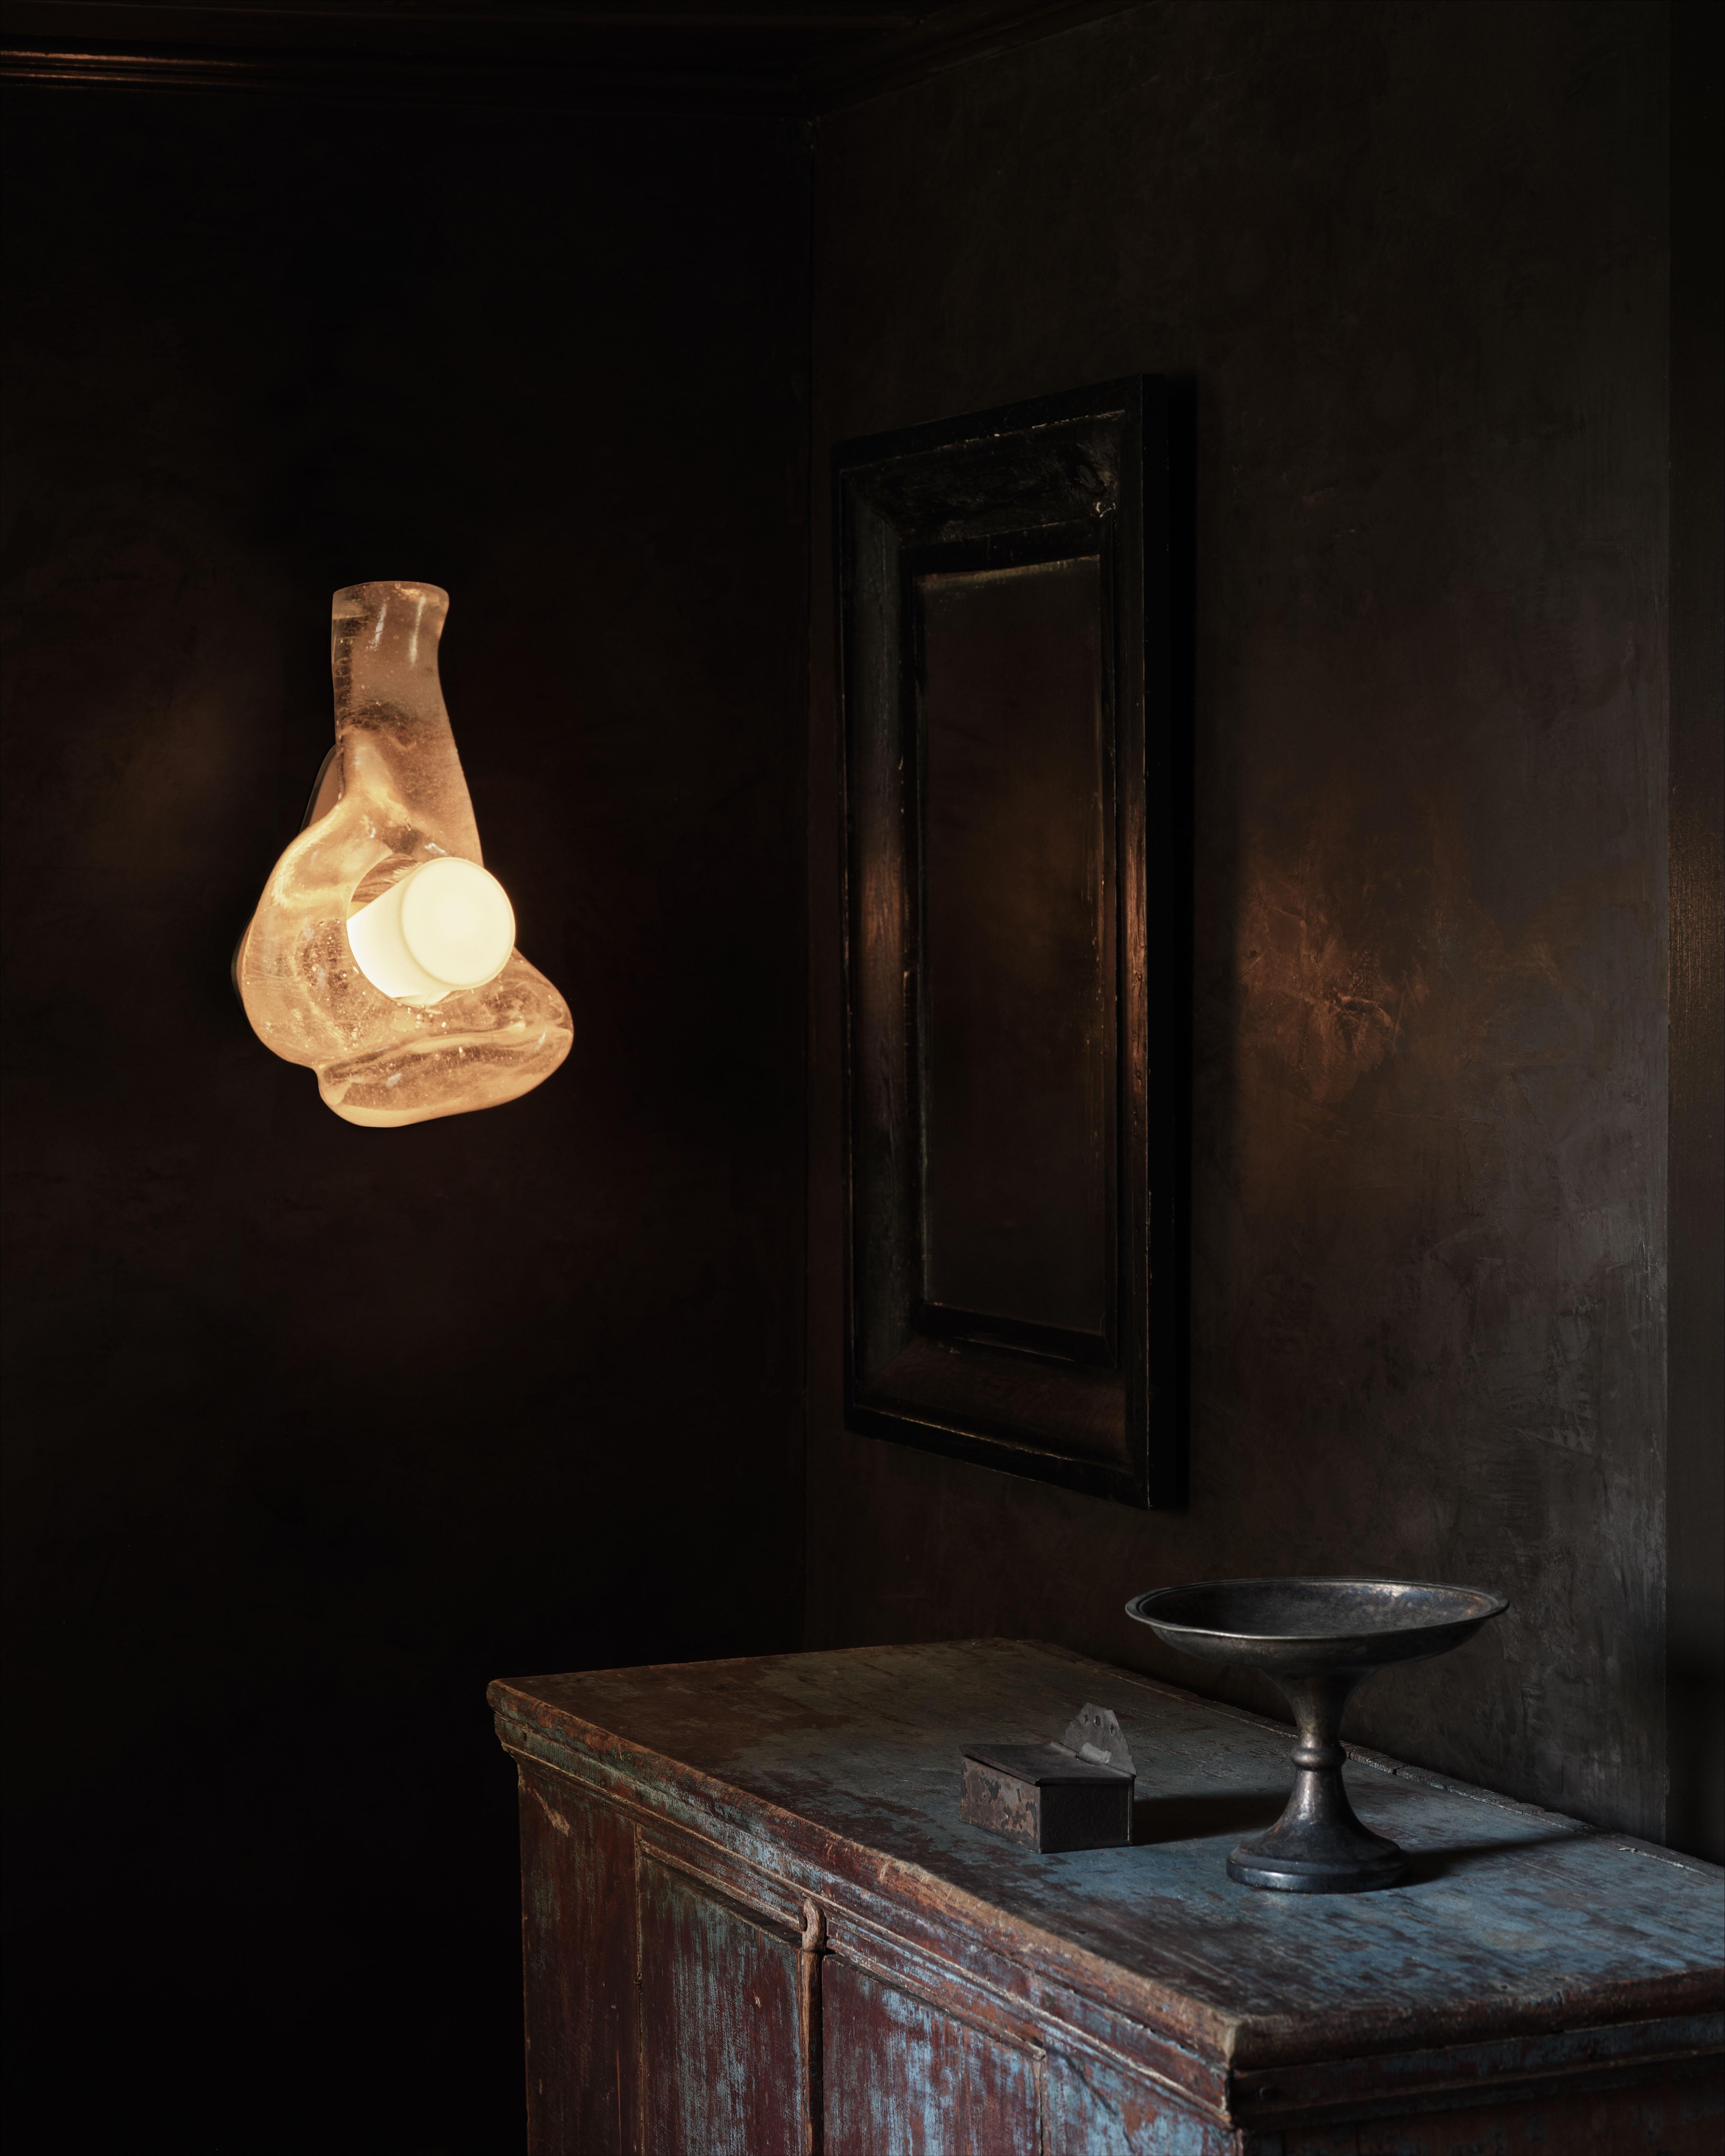 Crystal clear molten glass is poured into a graphite mold to create the sculptural body of the sconce, which is pierced by a hand-blown white glass cone and mounted to a bronze backplate armature.

Materials: Cast Bronze + Cast Glass

Dimensions: